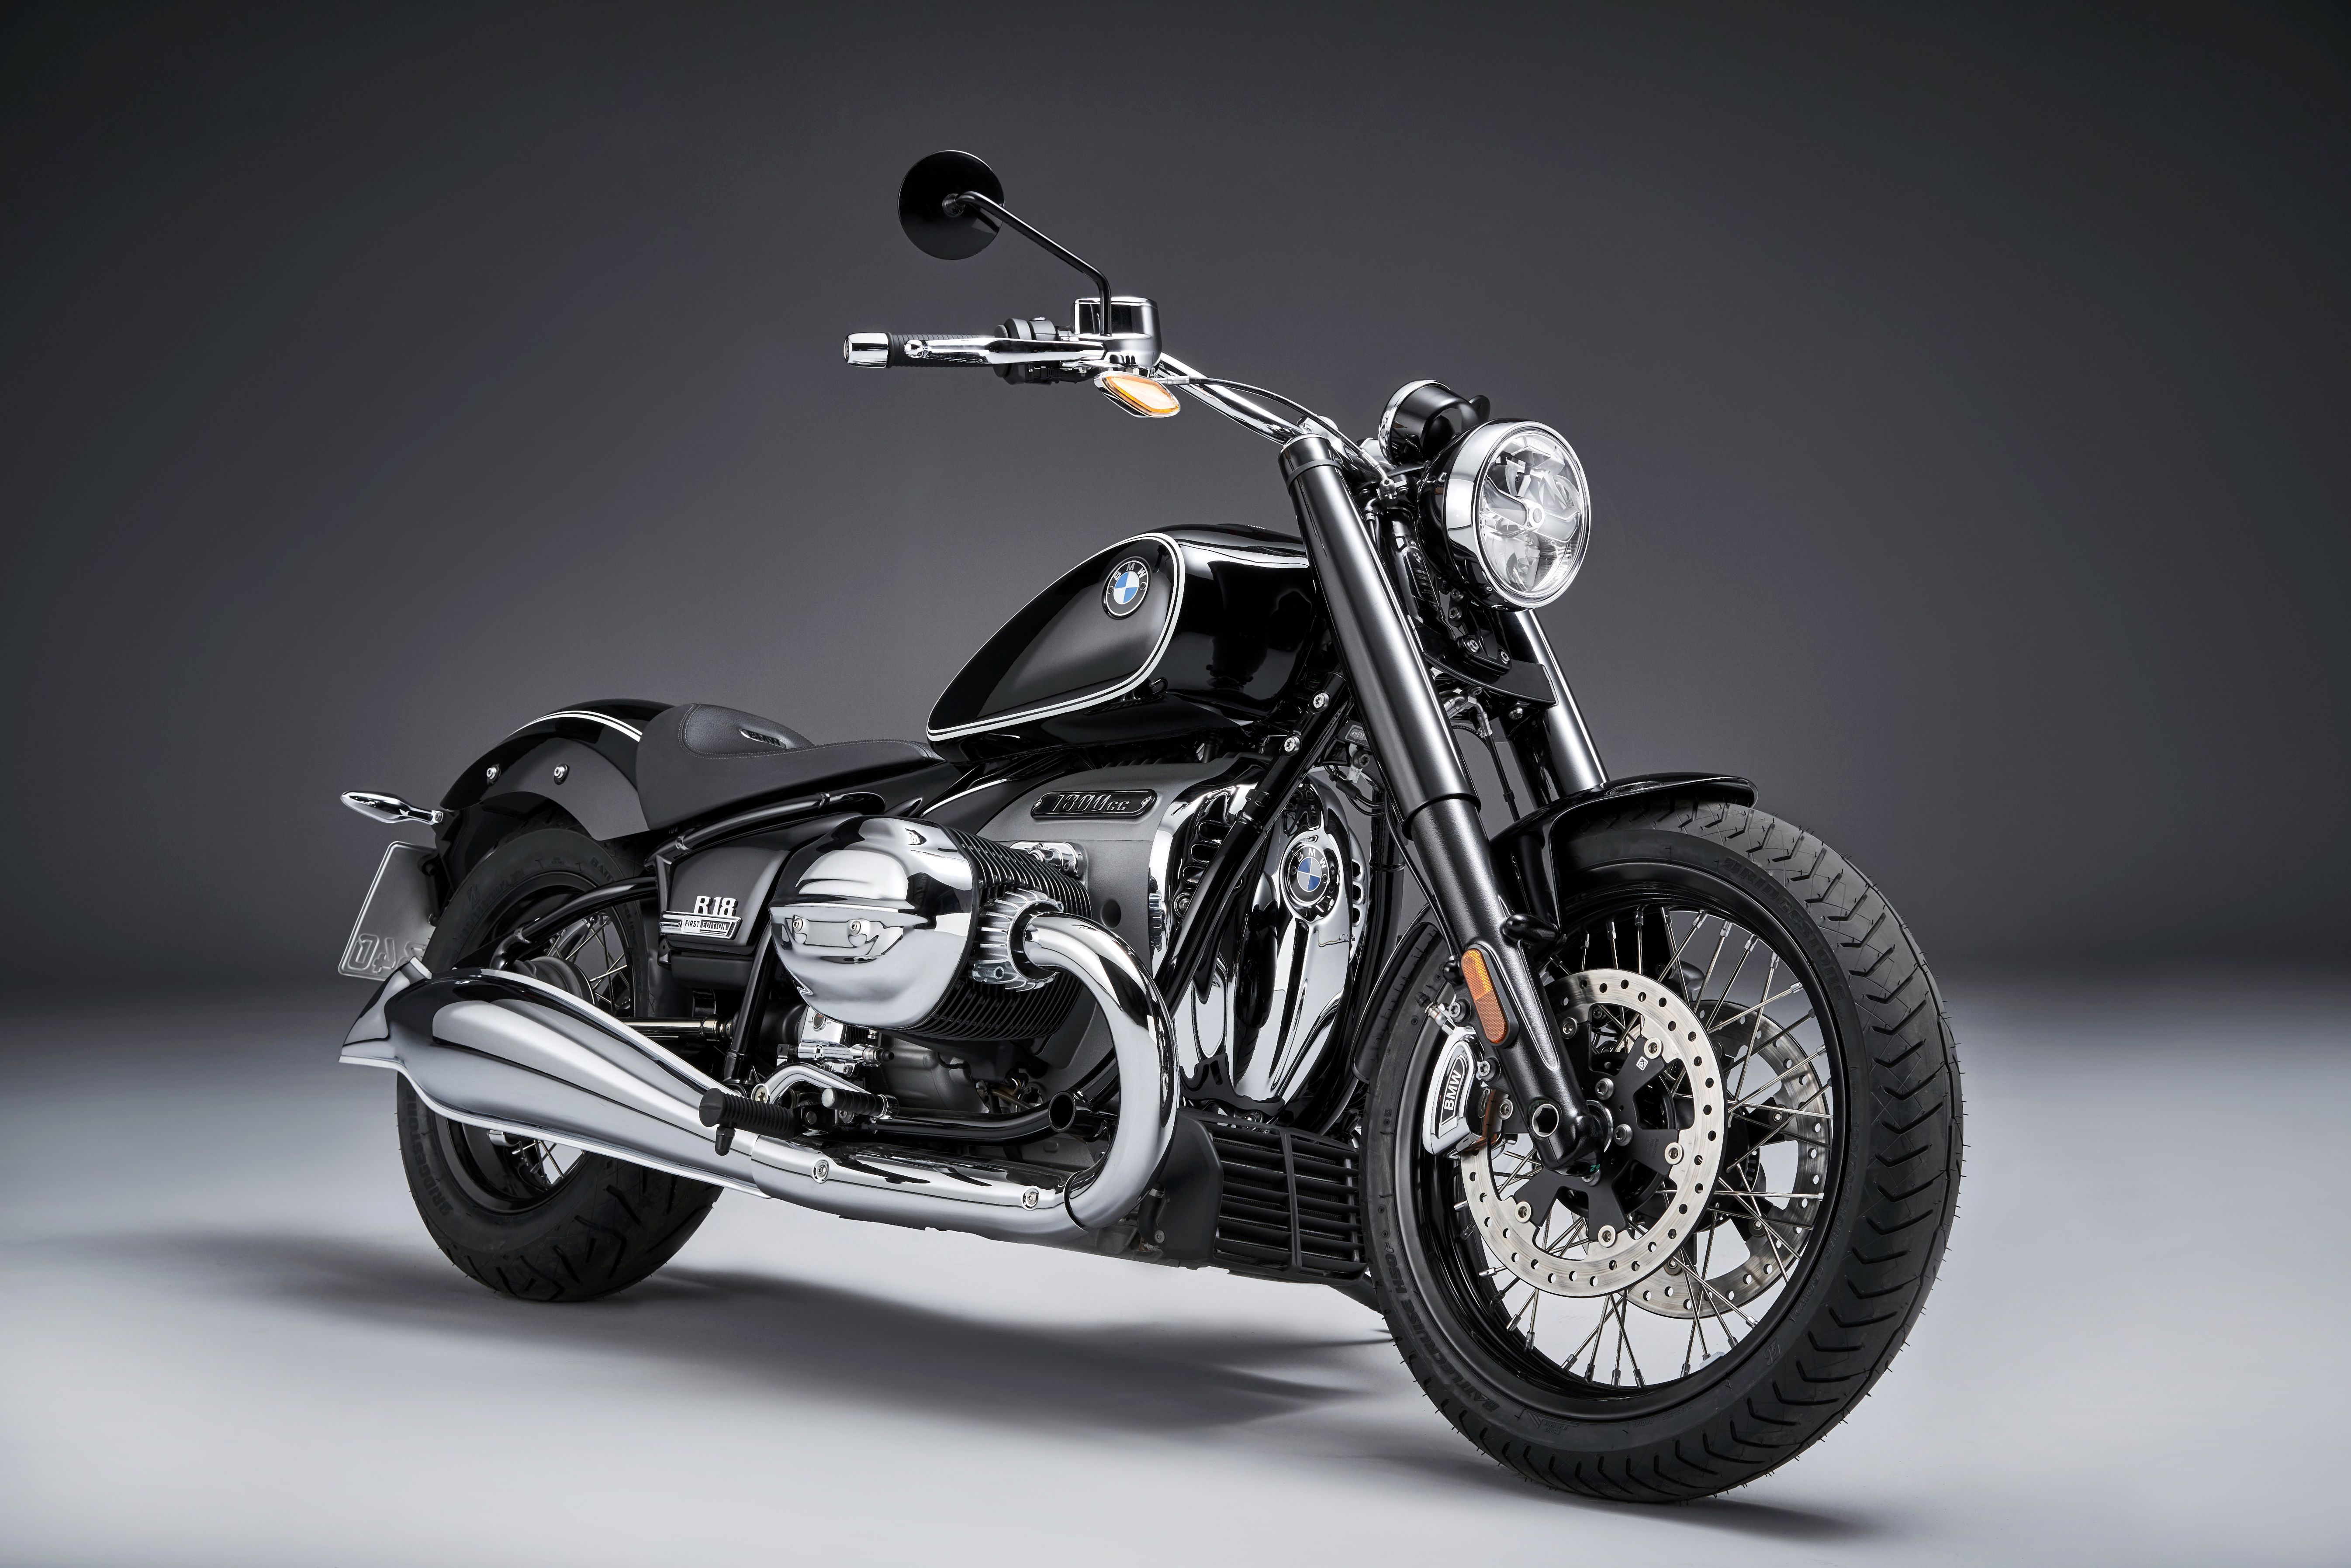 BMW R 18 Cruiser Motorcycle Is Big, Beautiful, but Must Battle Harley